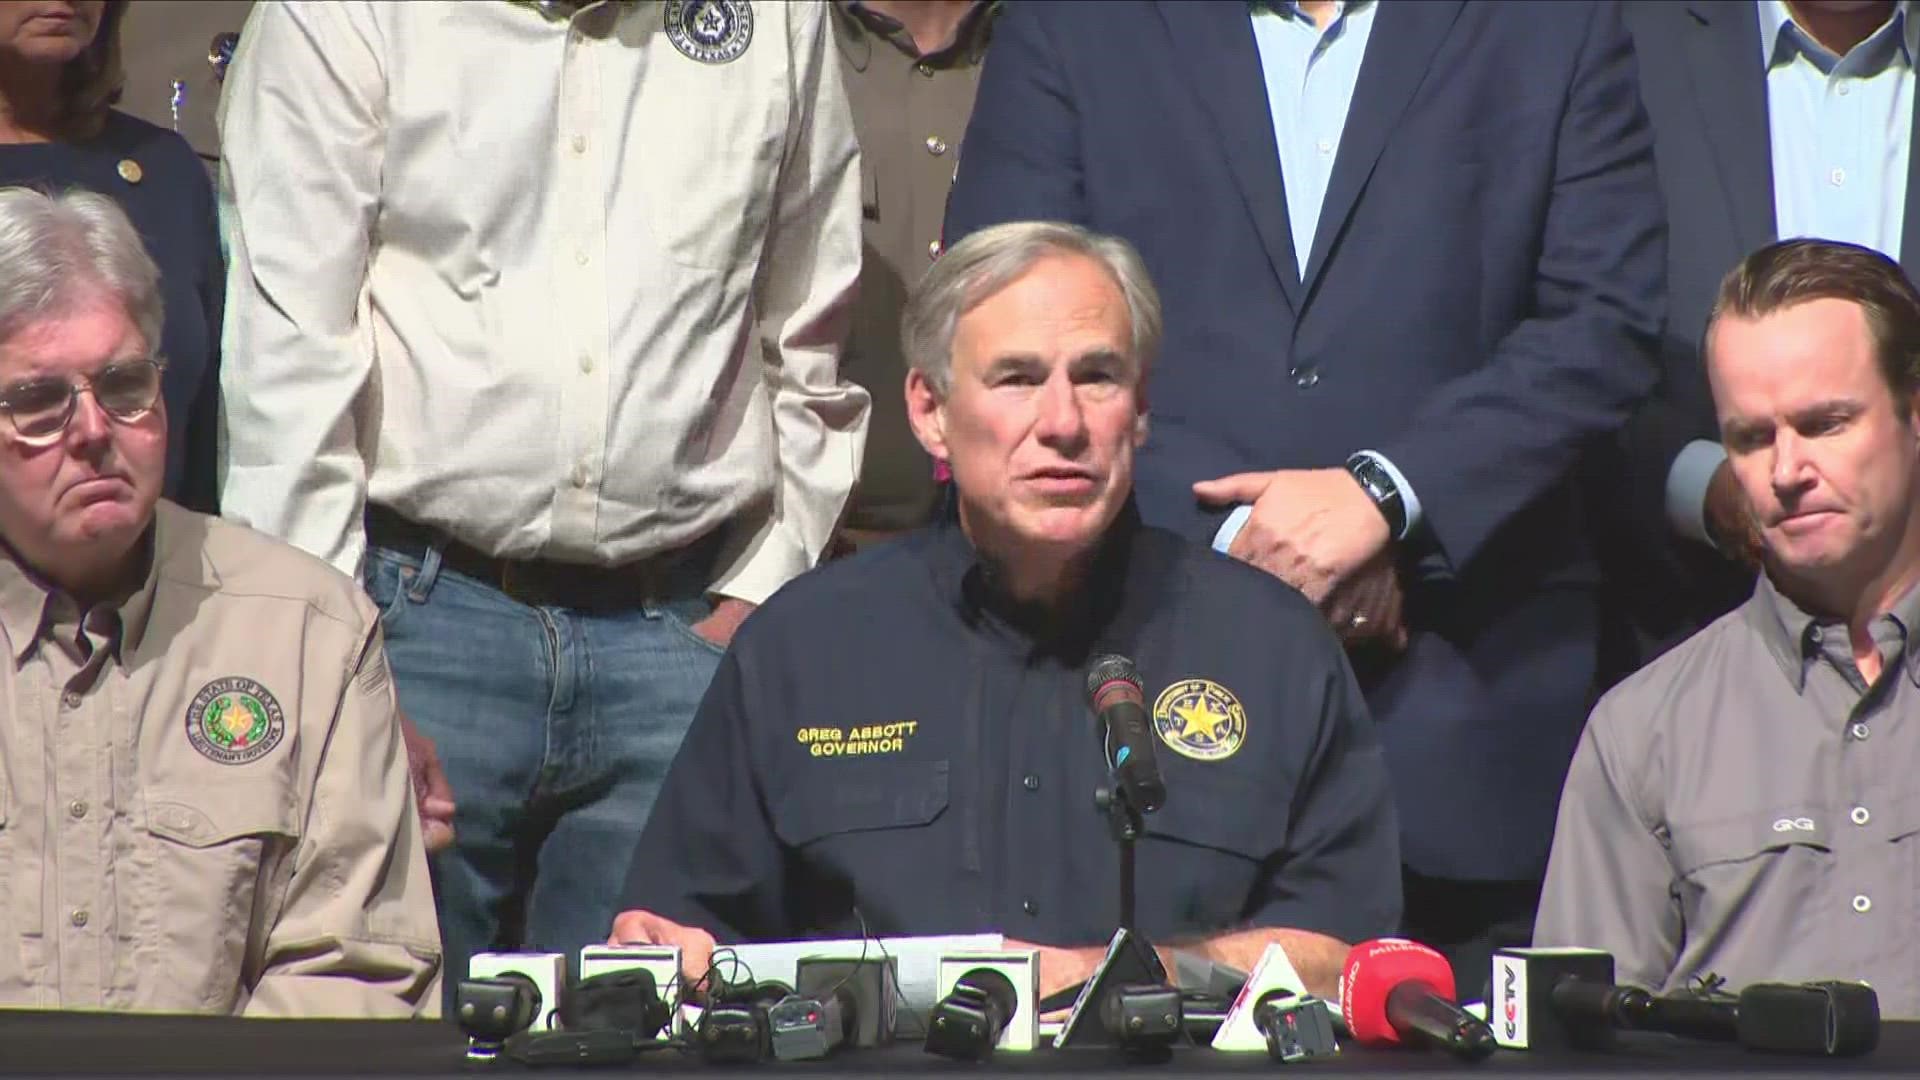 Gov. Abbott provided mental health resources for individuals, including law enforcement, affected by the mass shooting at a Texas elementary school.